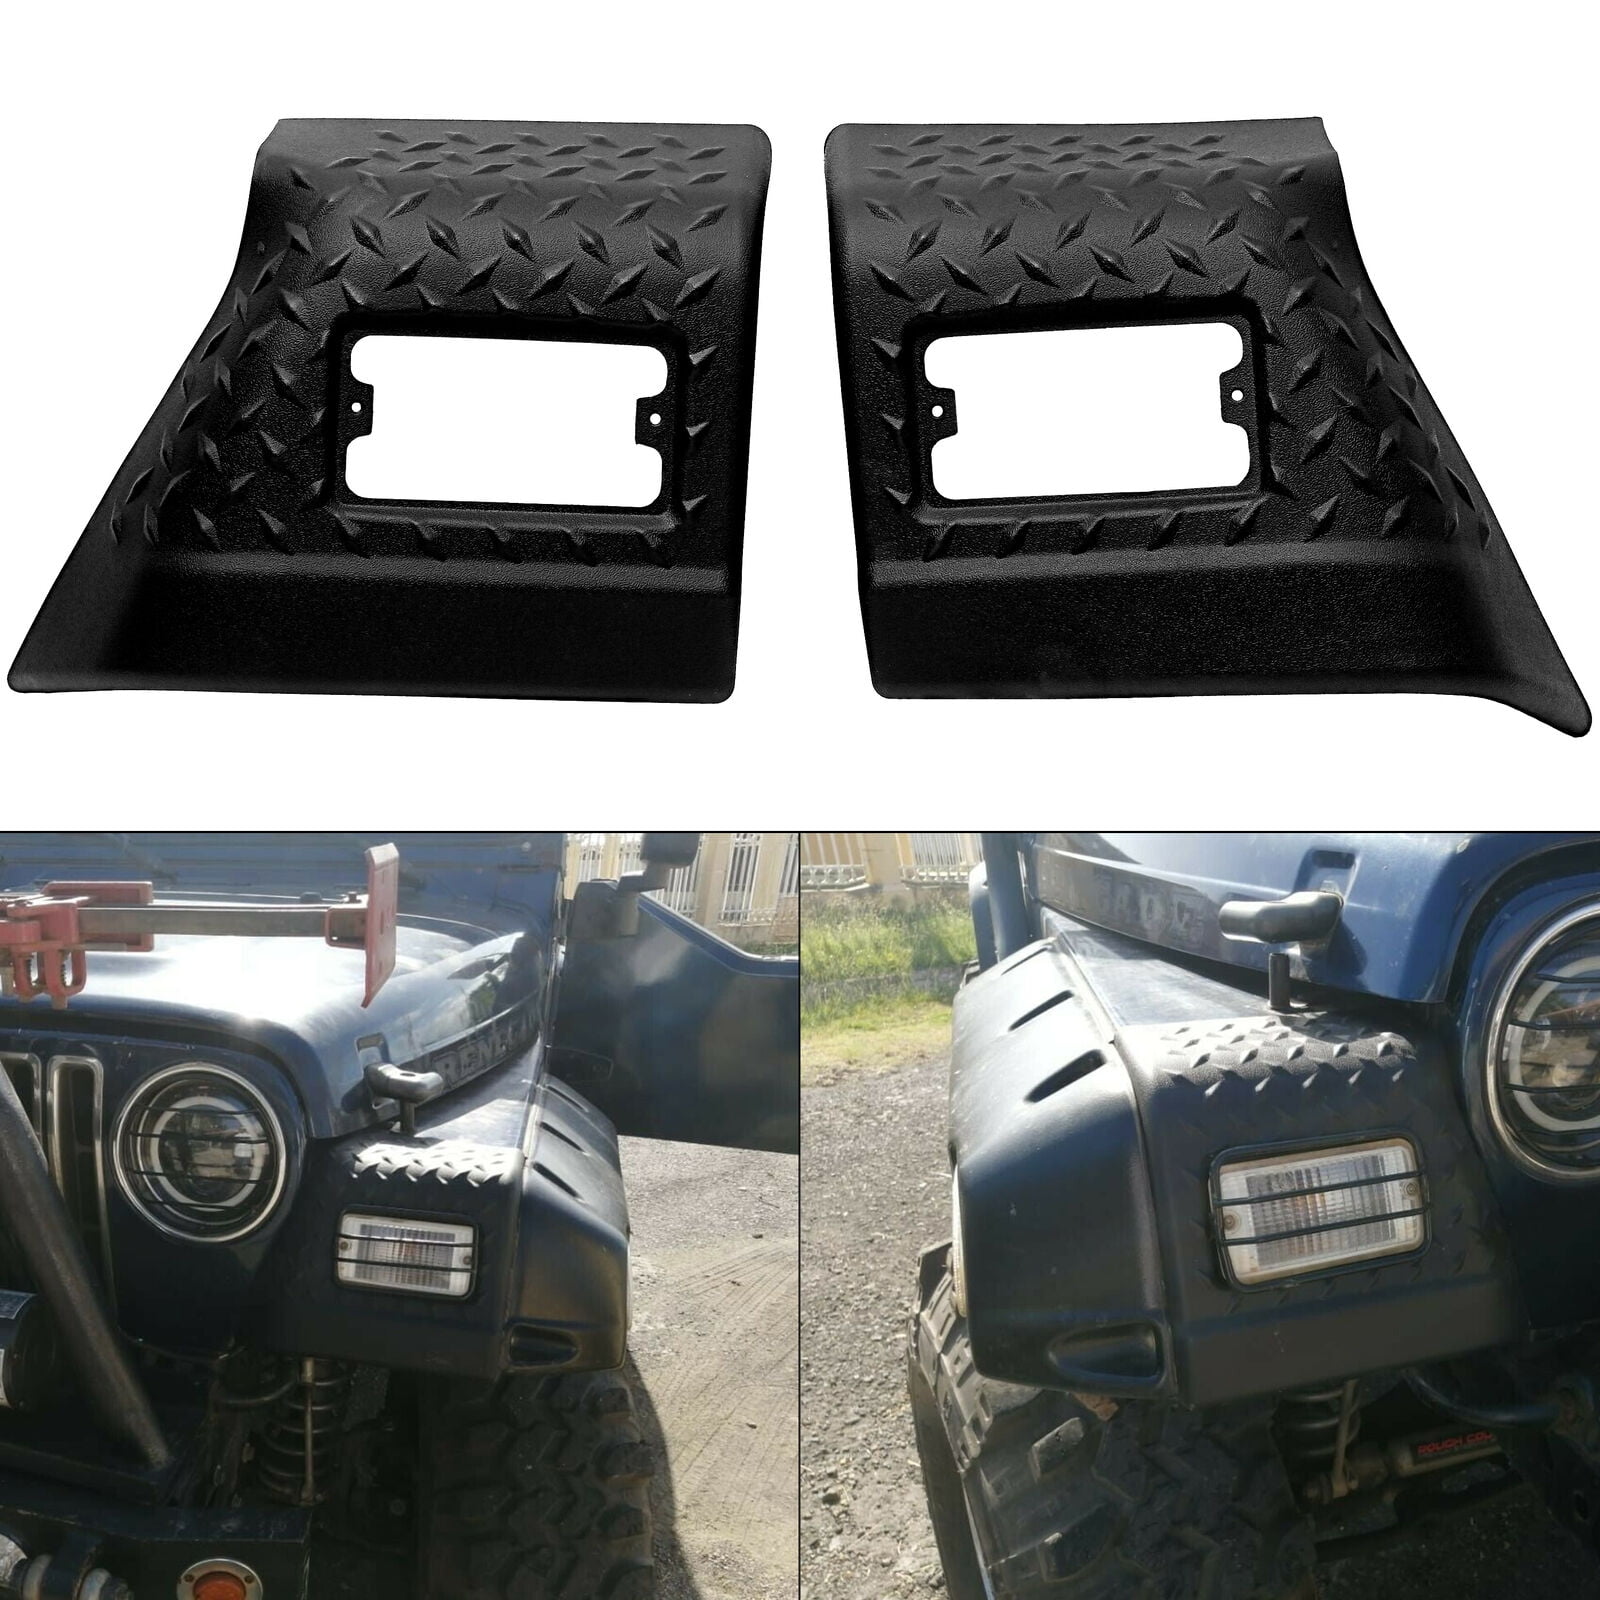 Kojem Front Fender Guards Body Armor Kit Compatible with Jeep TJ Wrangler  97-06 Black Diamond Textured Plate  